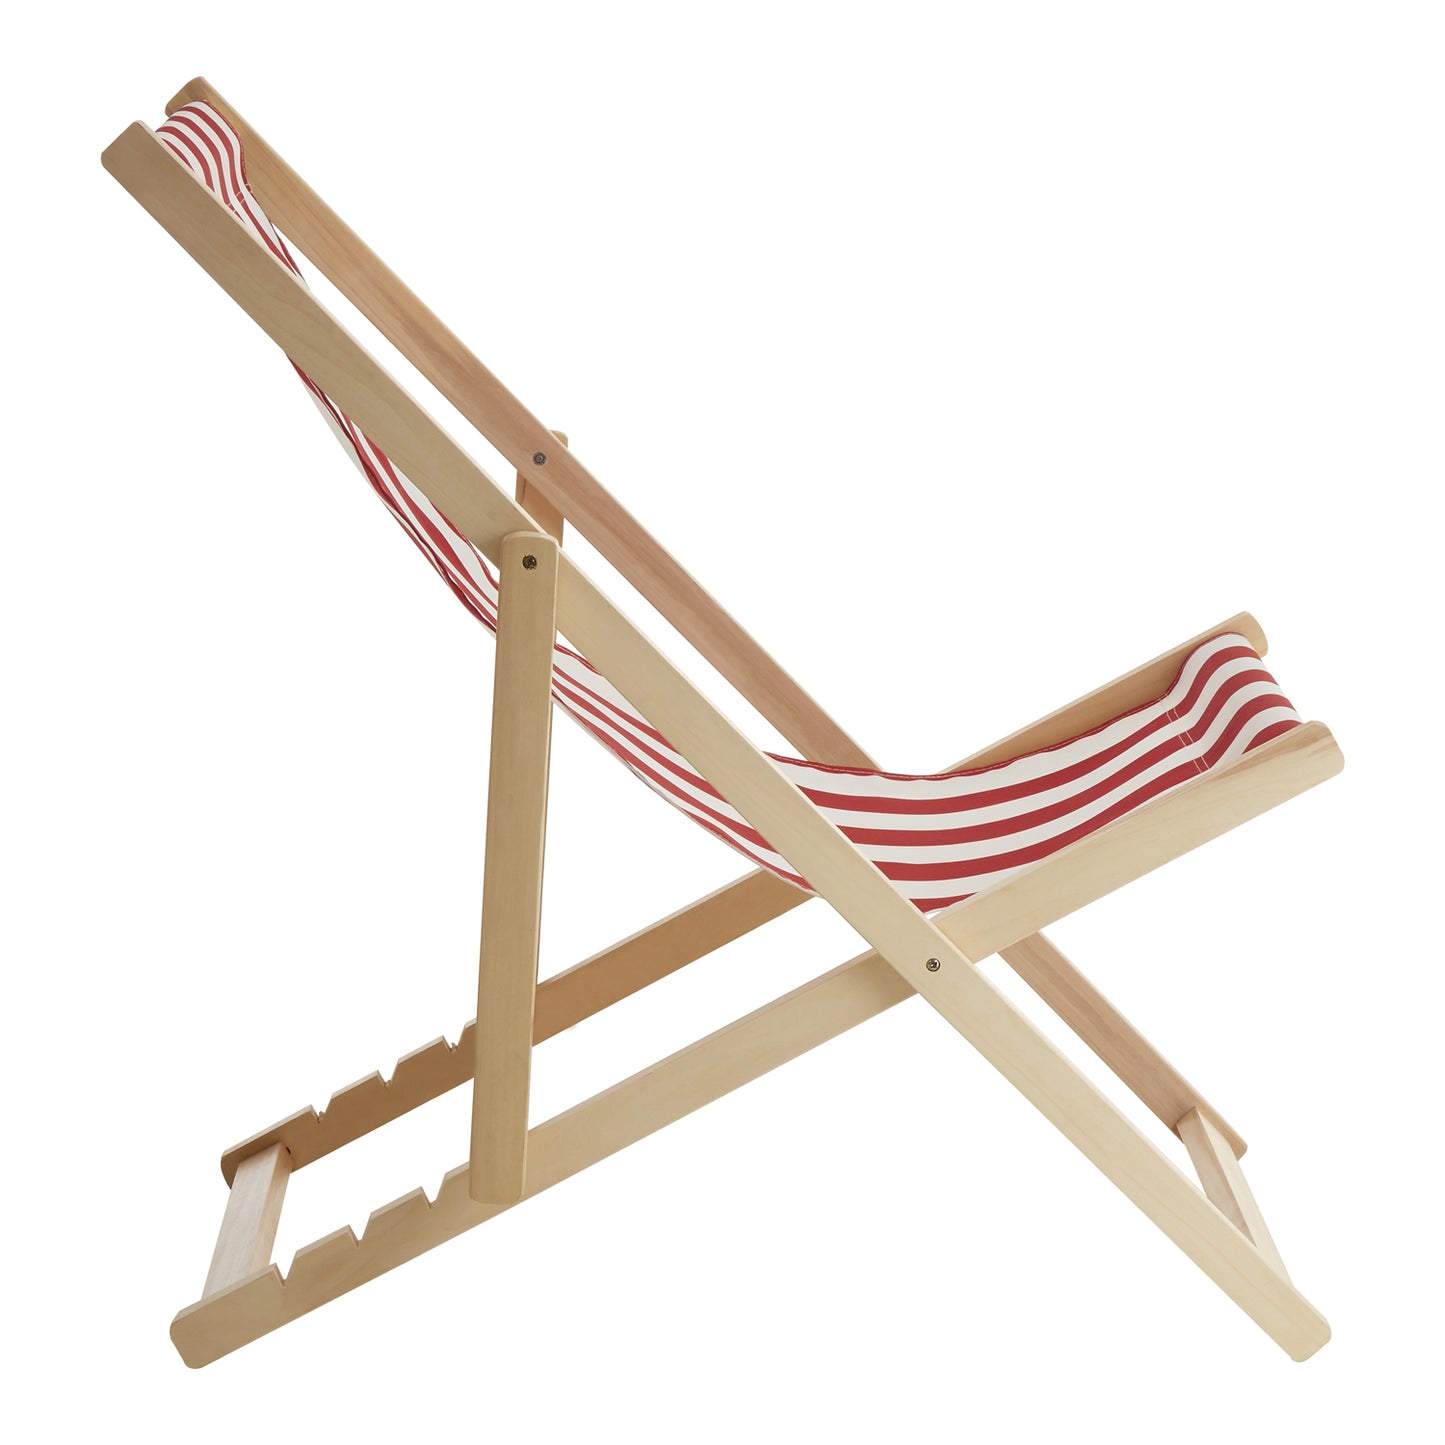 Beauport Red And White Stripe Deck Chair